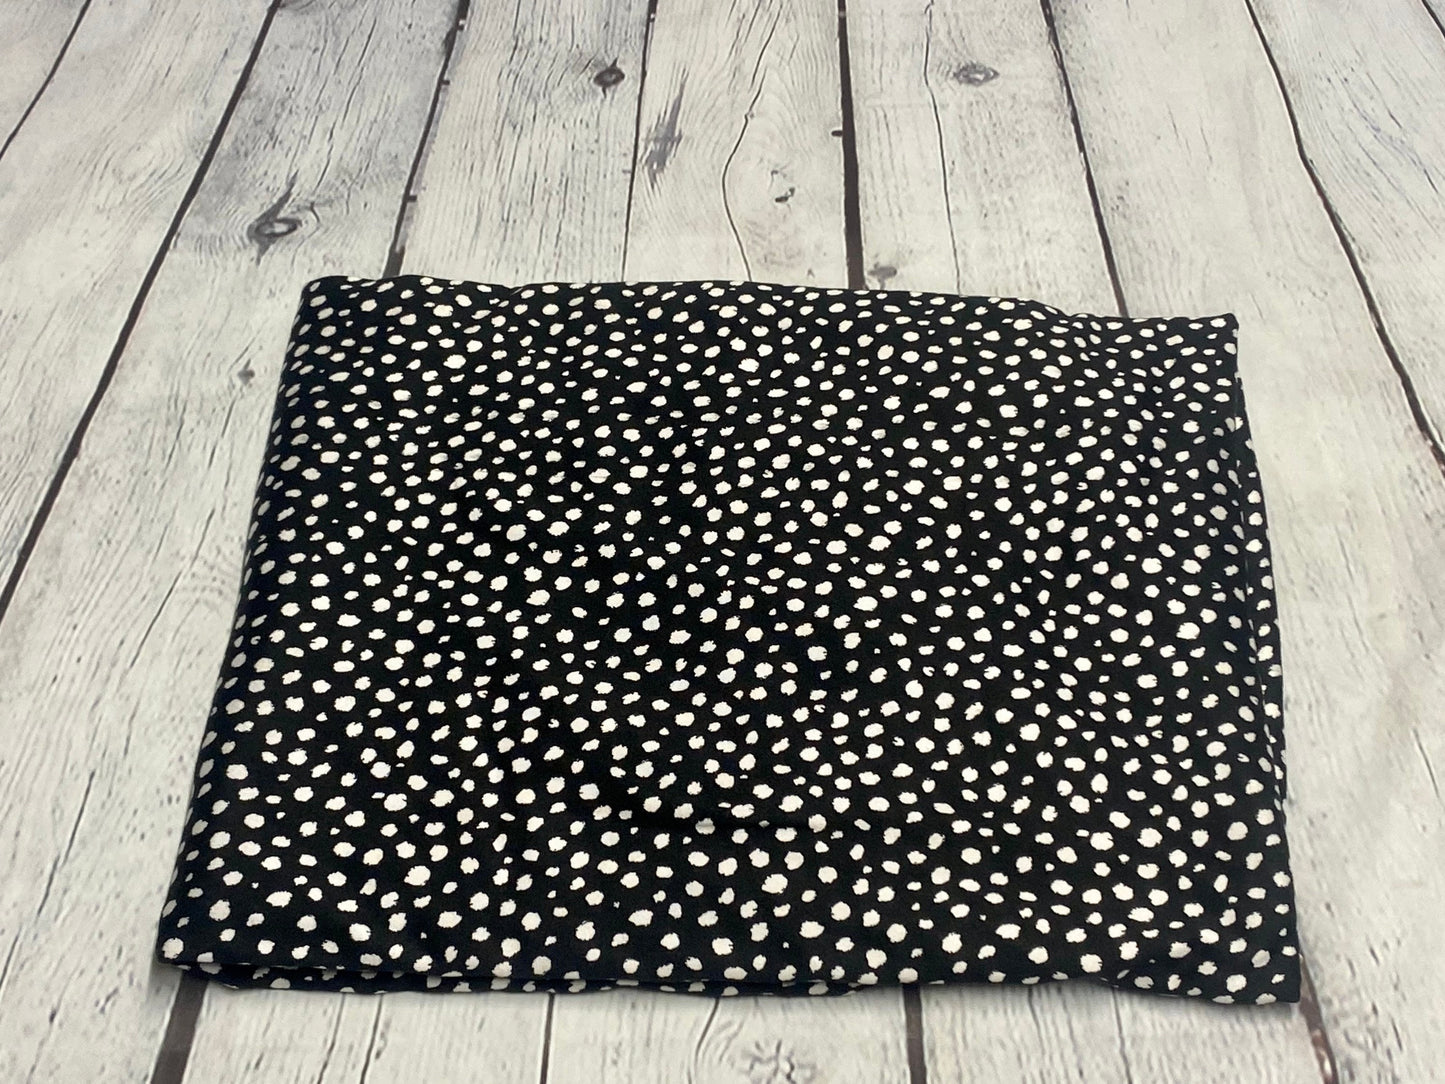 DBP Double Brushed Poly Spandex Print Medium Assorted Polka Dot Print By The Yard